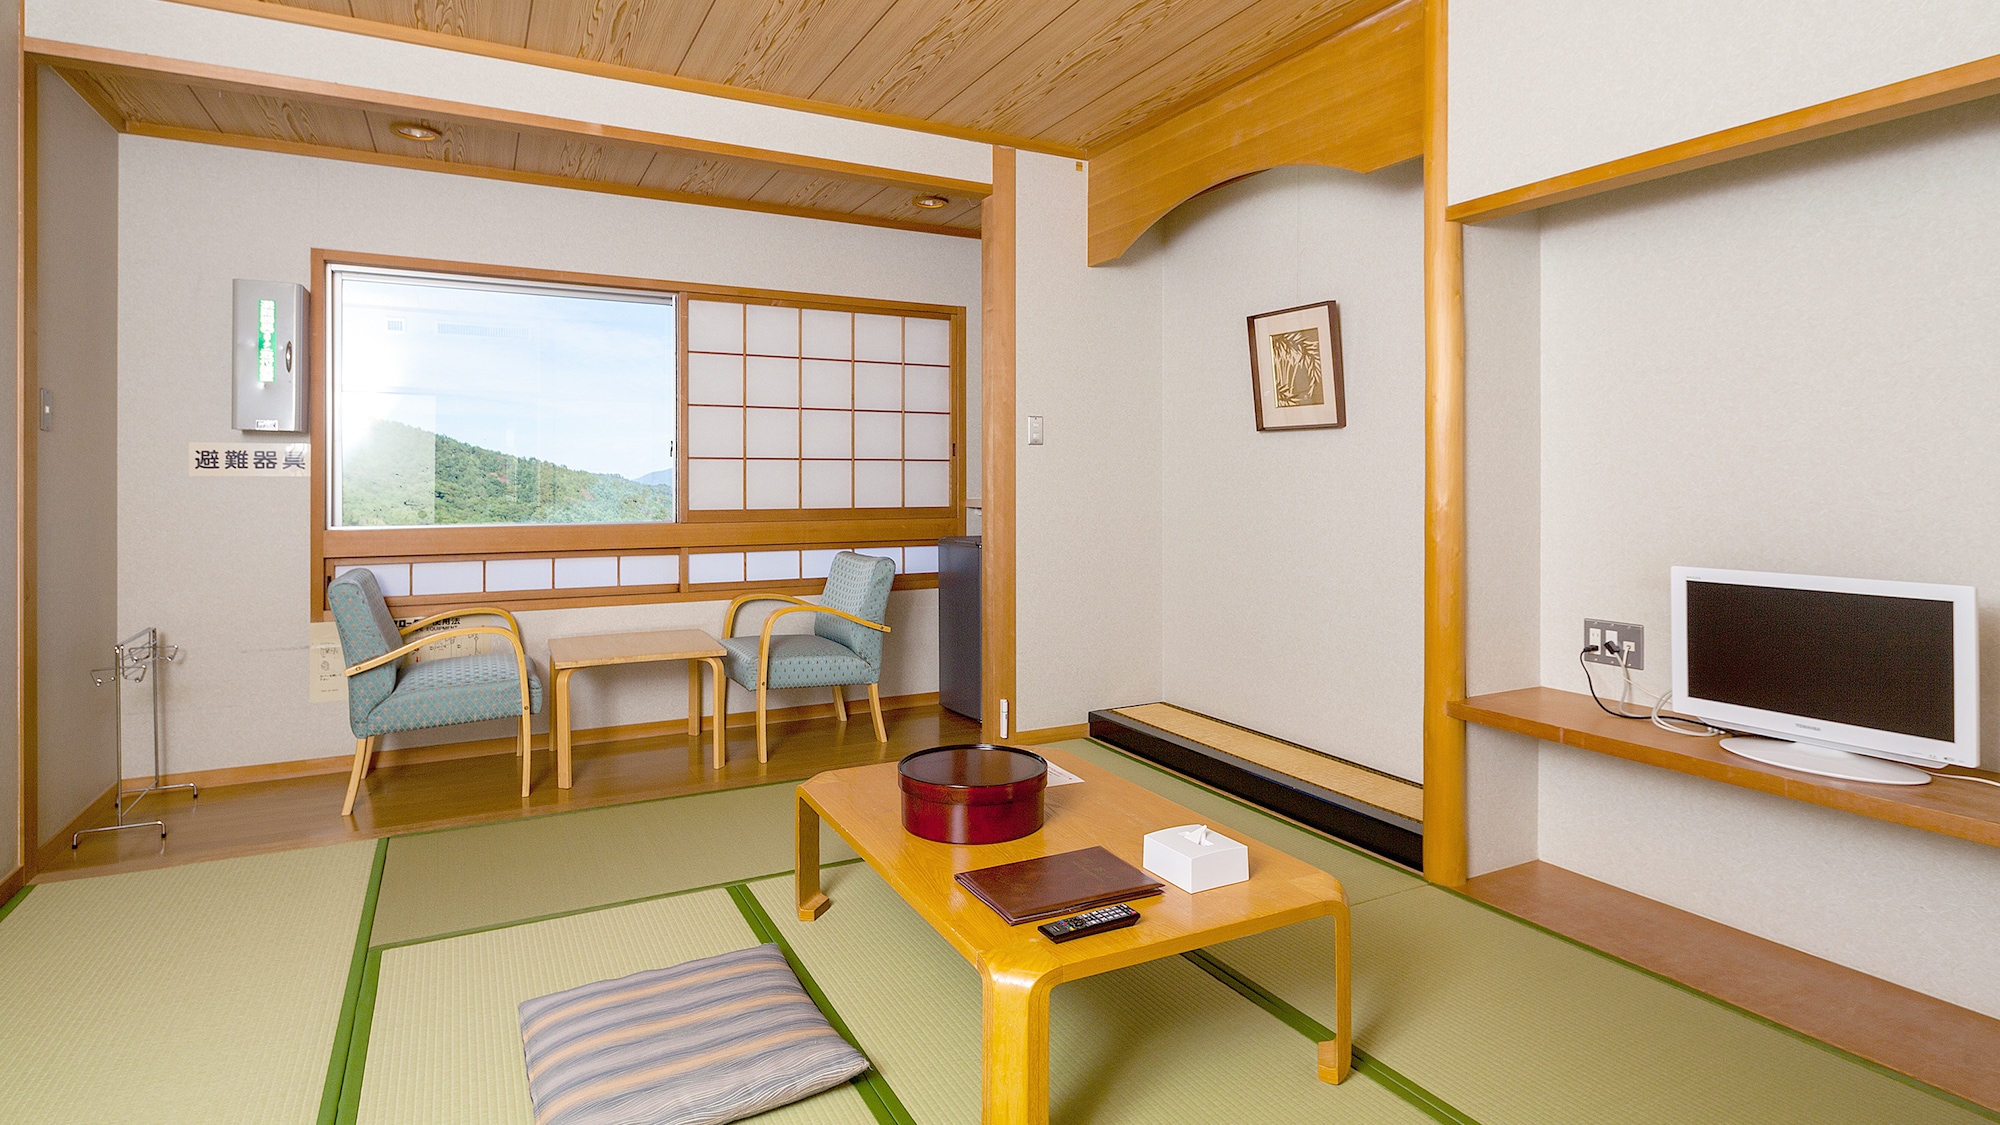 [Example of Japanese-style room] The view from the window has a mountain view.